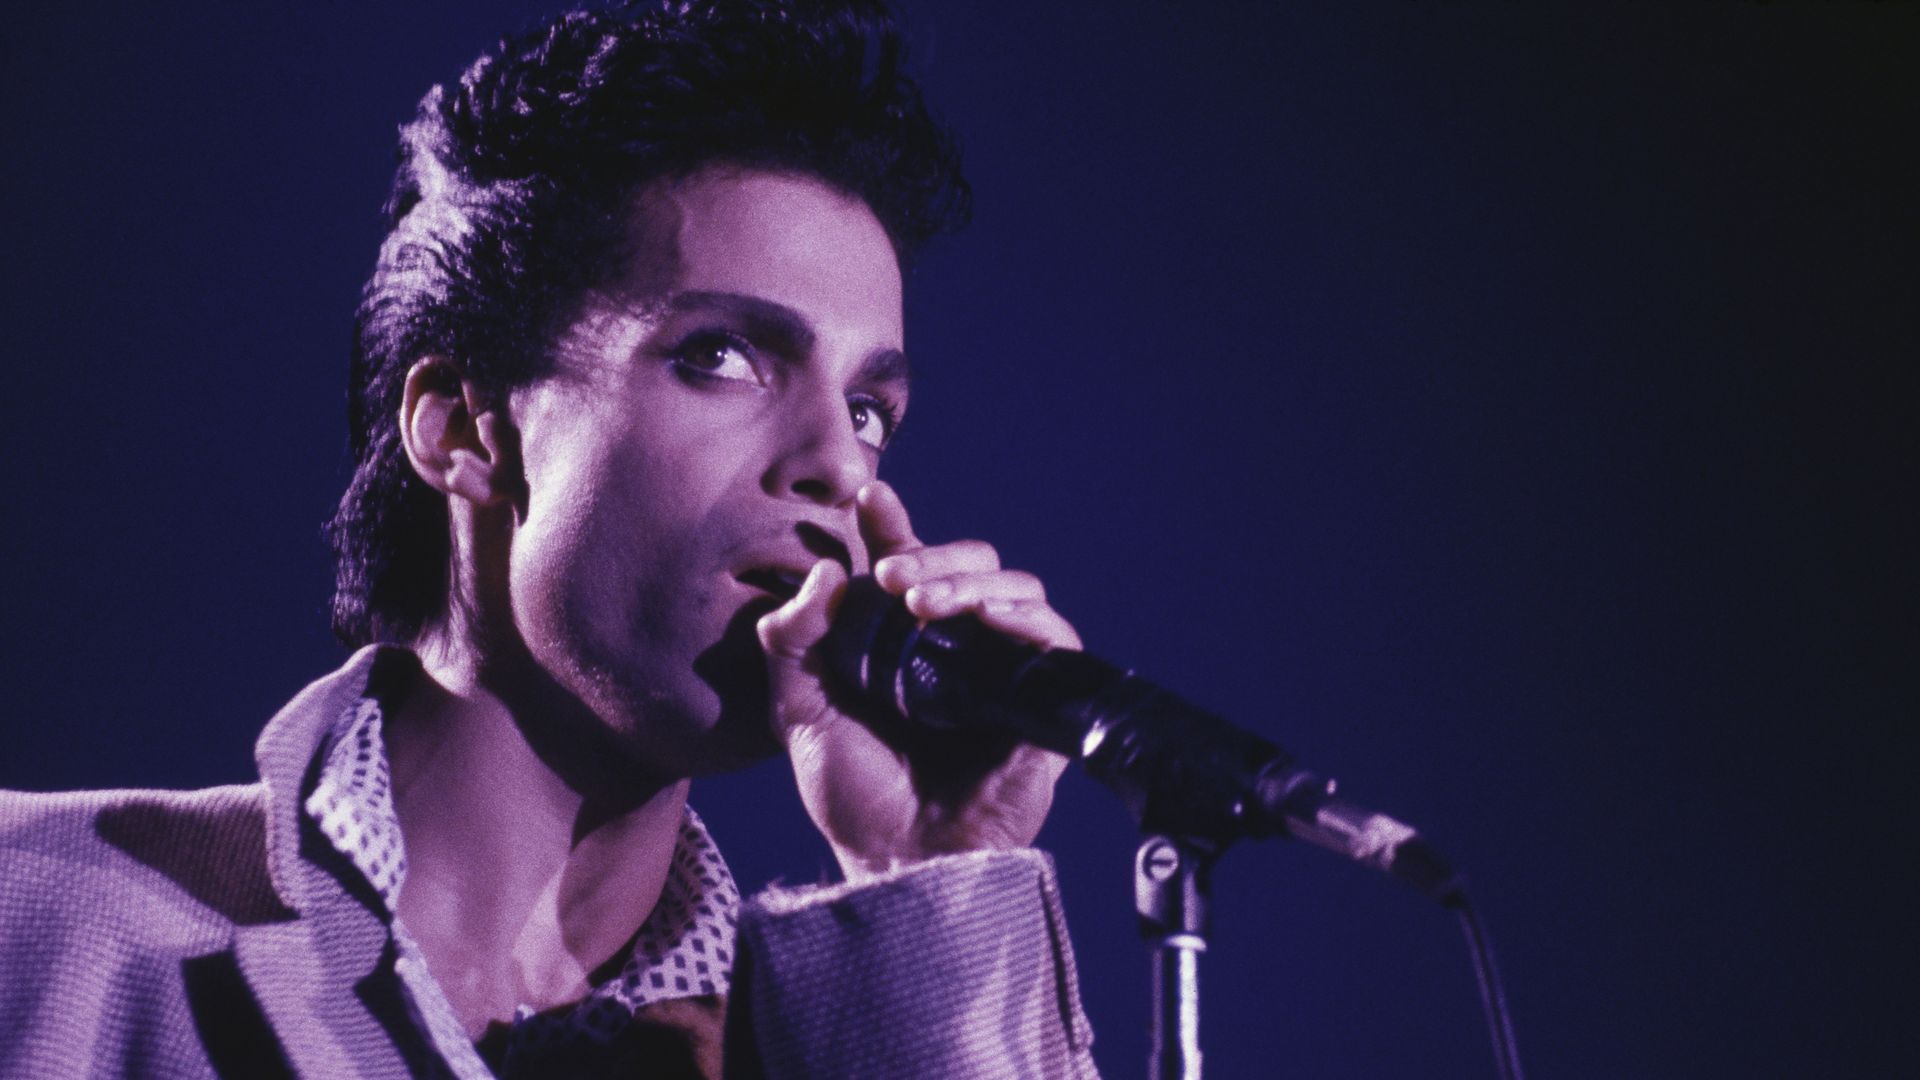 prince up close at a microphone with purple lighting